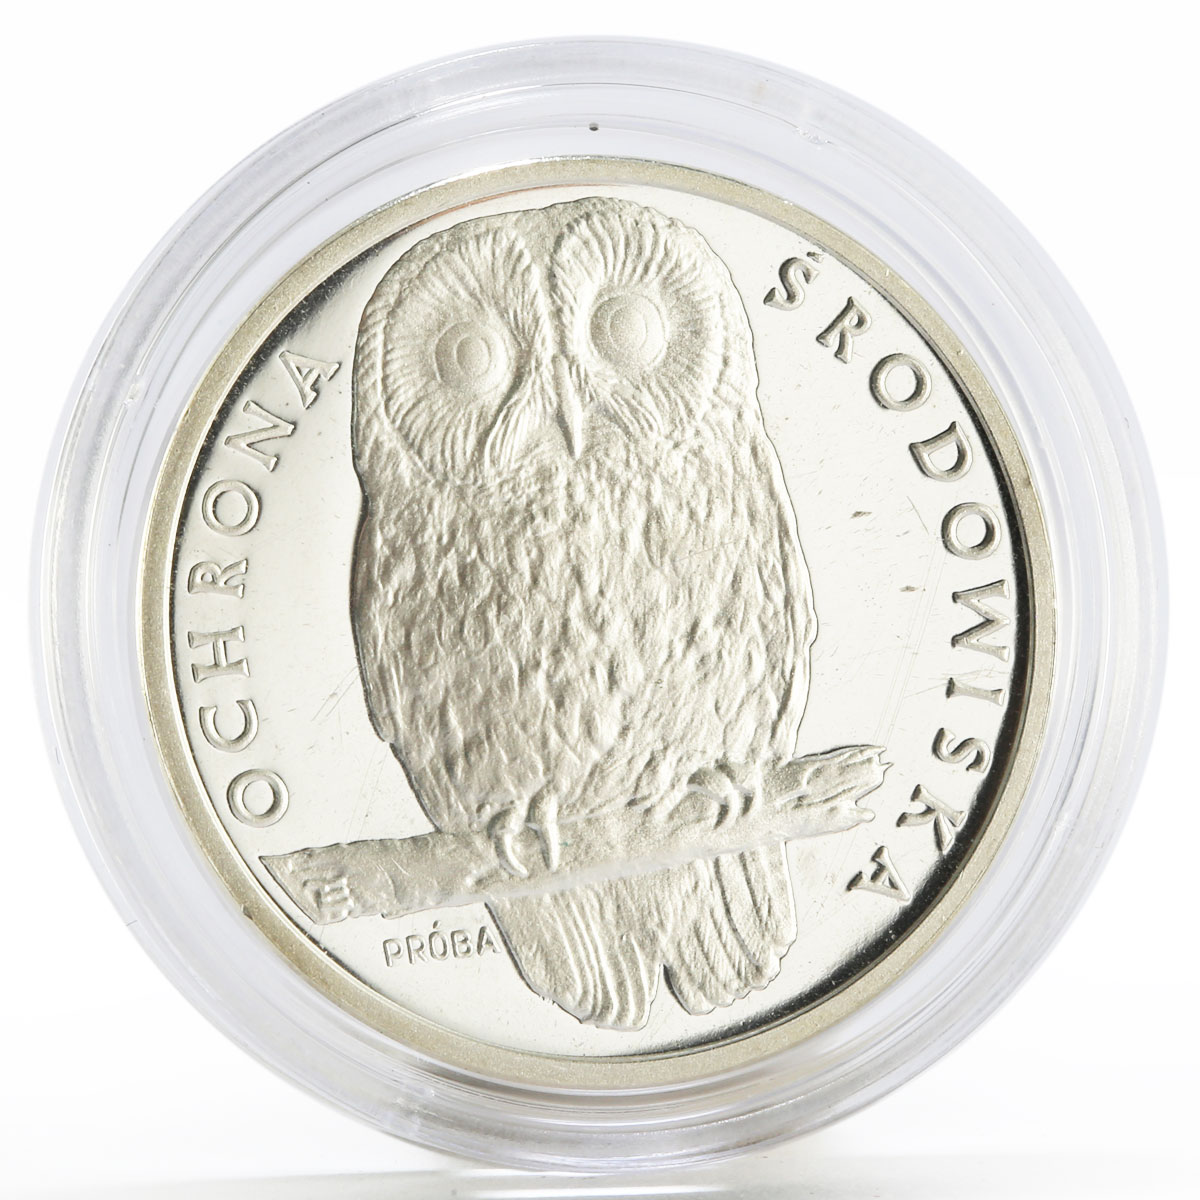 Poland 1000 zlotych Animal series Owl proba proof silver coin 1986